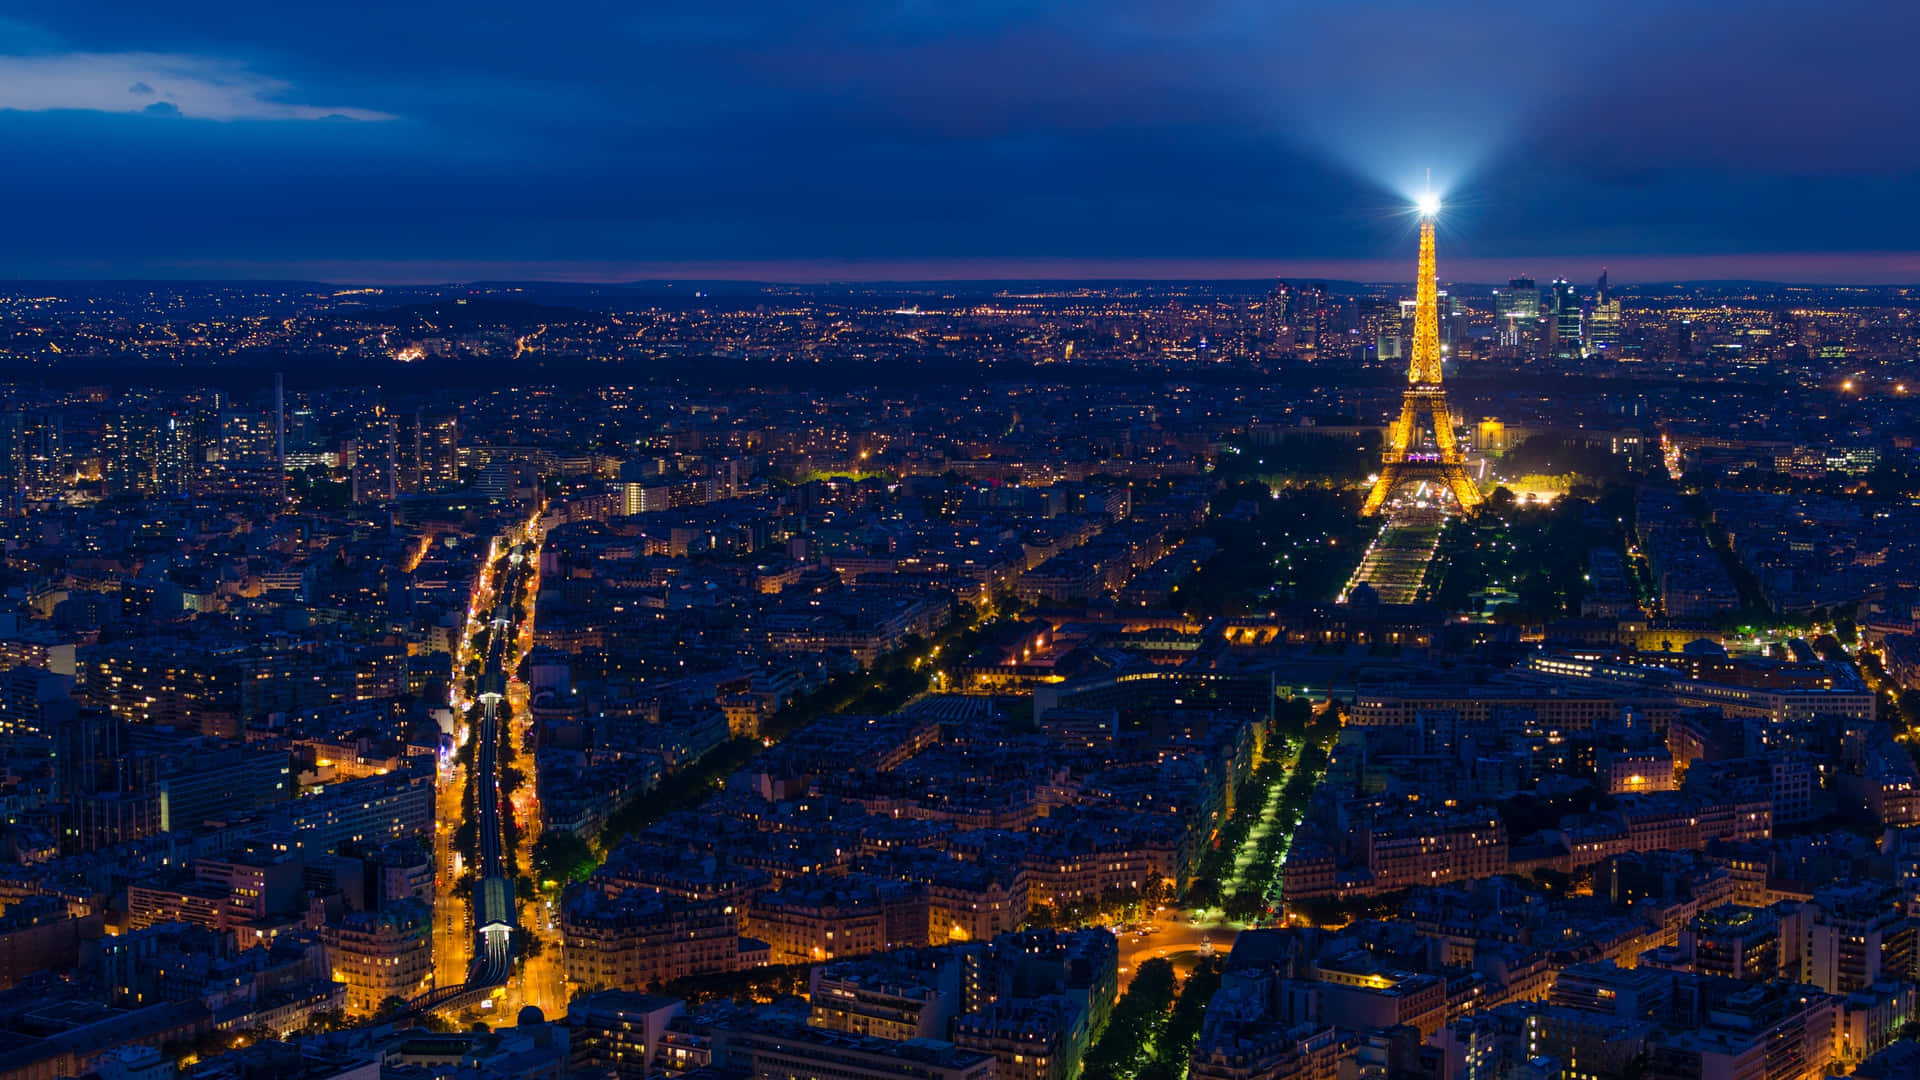 A Romantic View Of Paris At Night Background